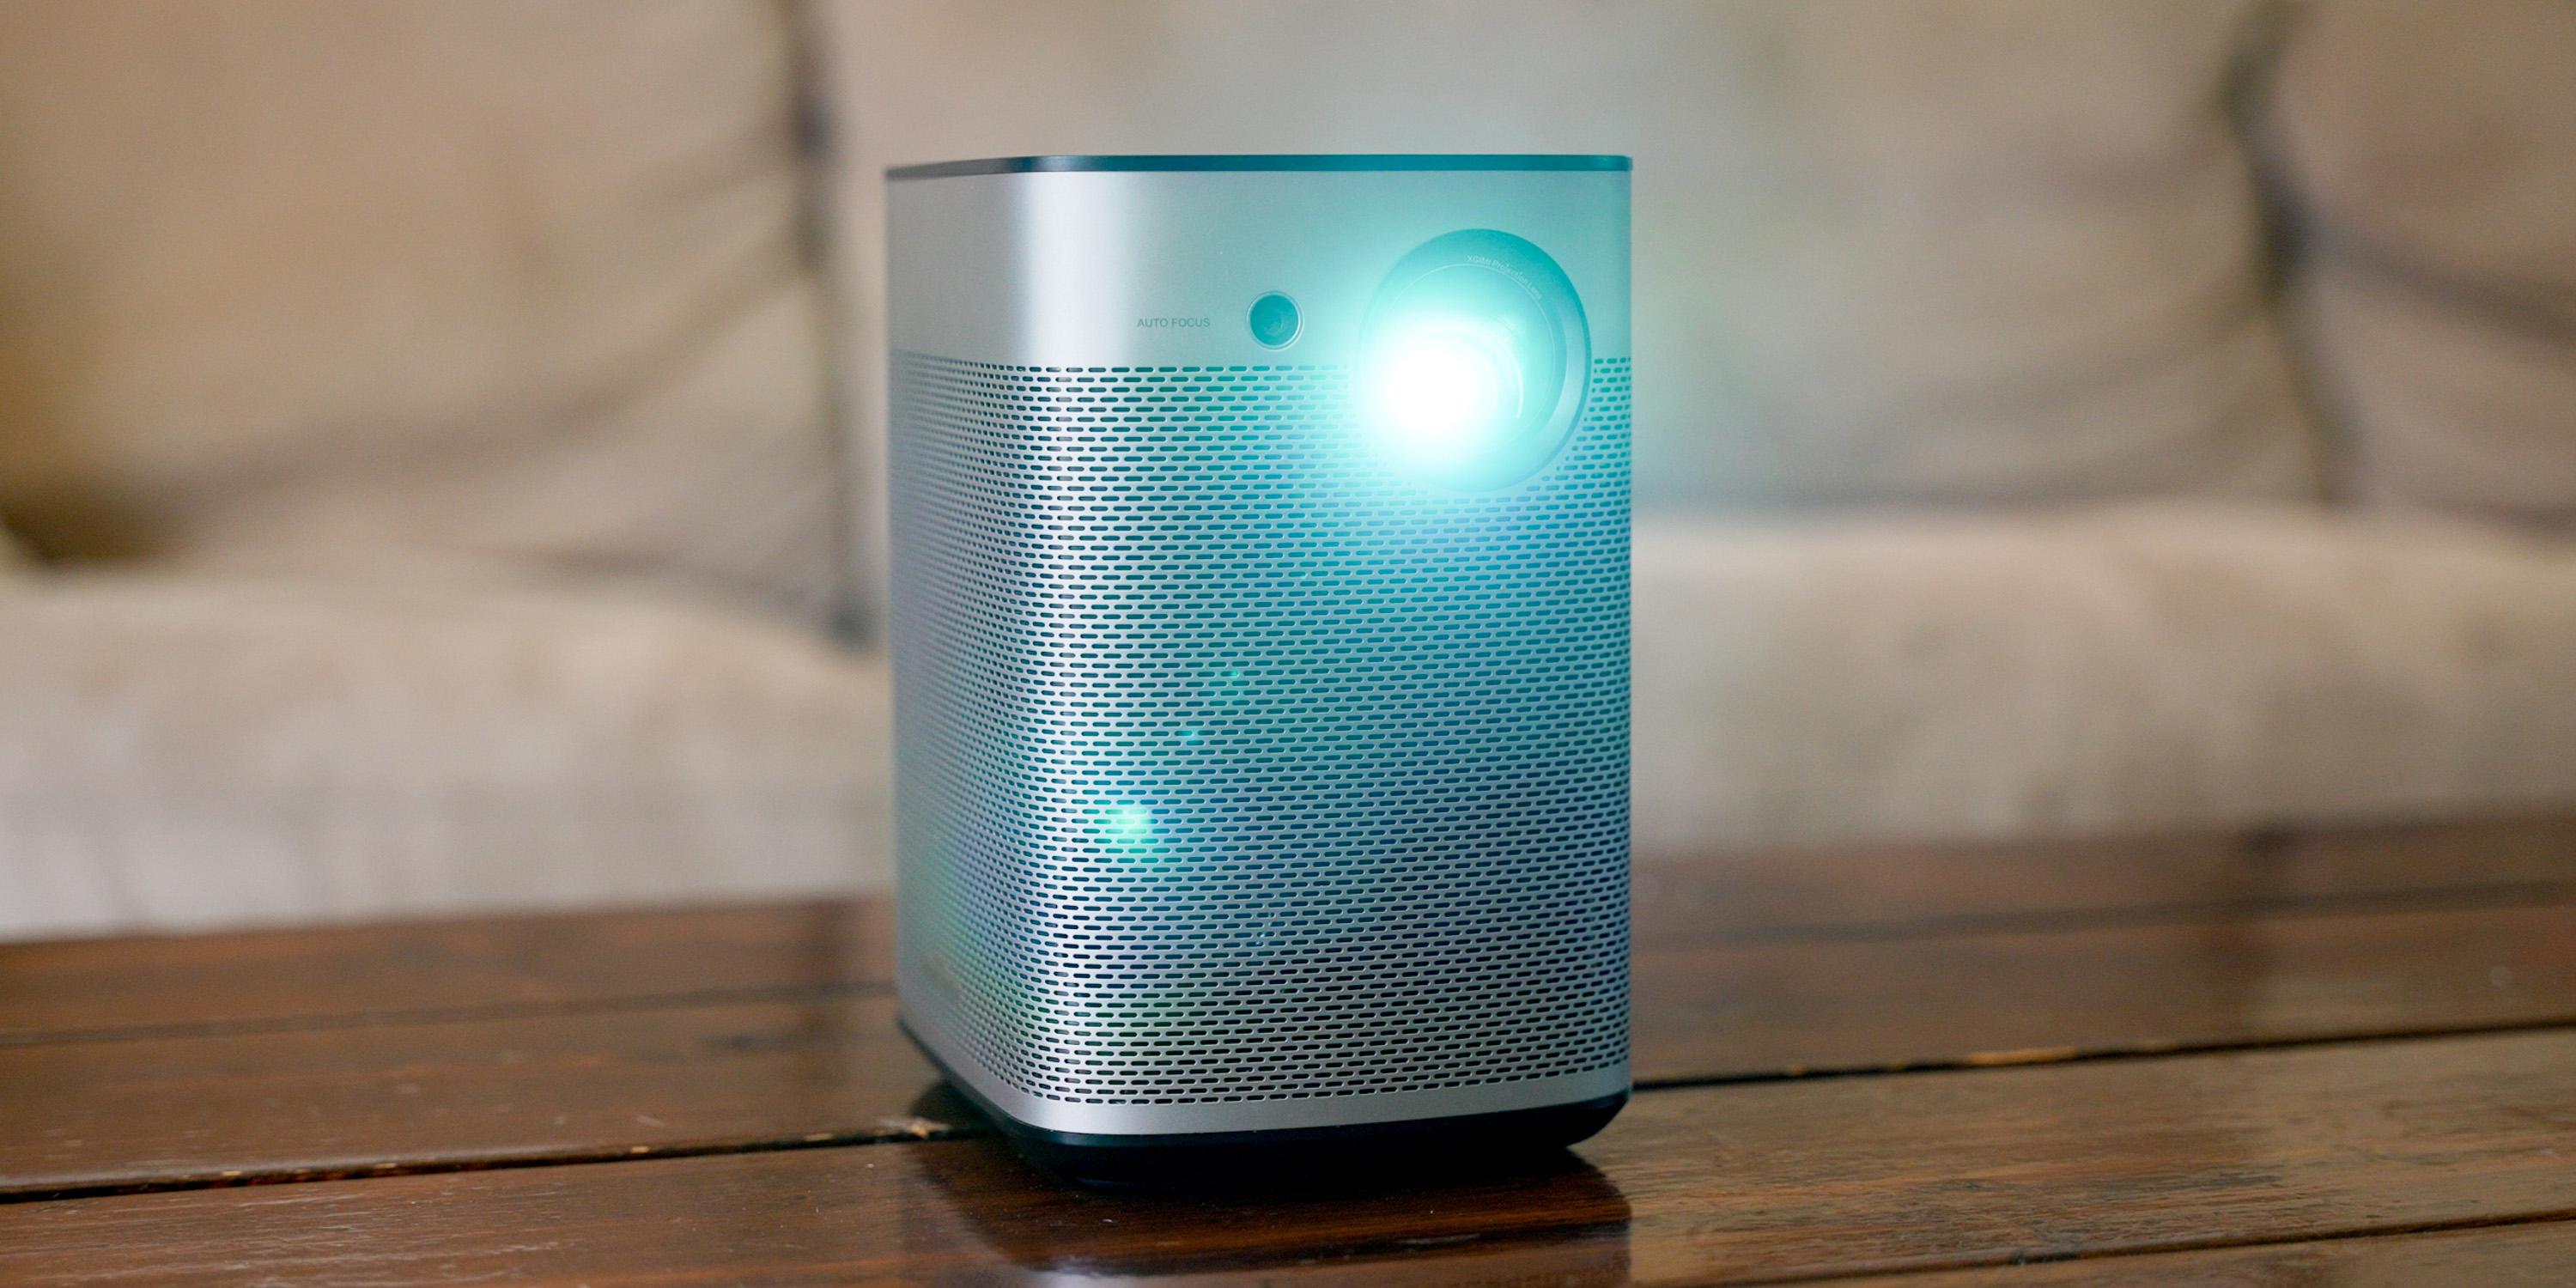 XGIMI Halo review: My new favorite portable projector